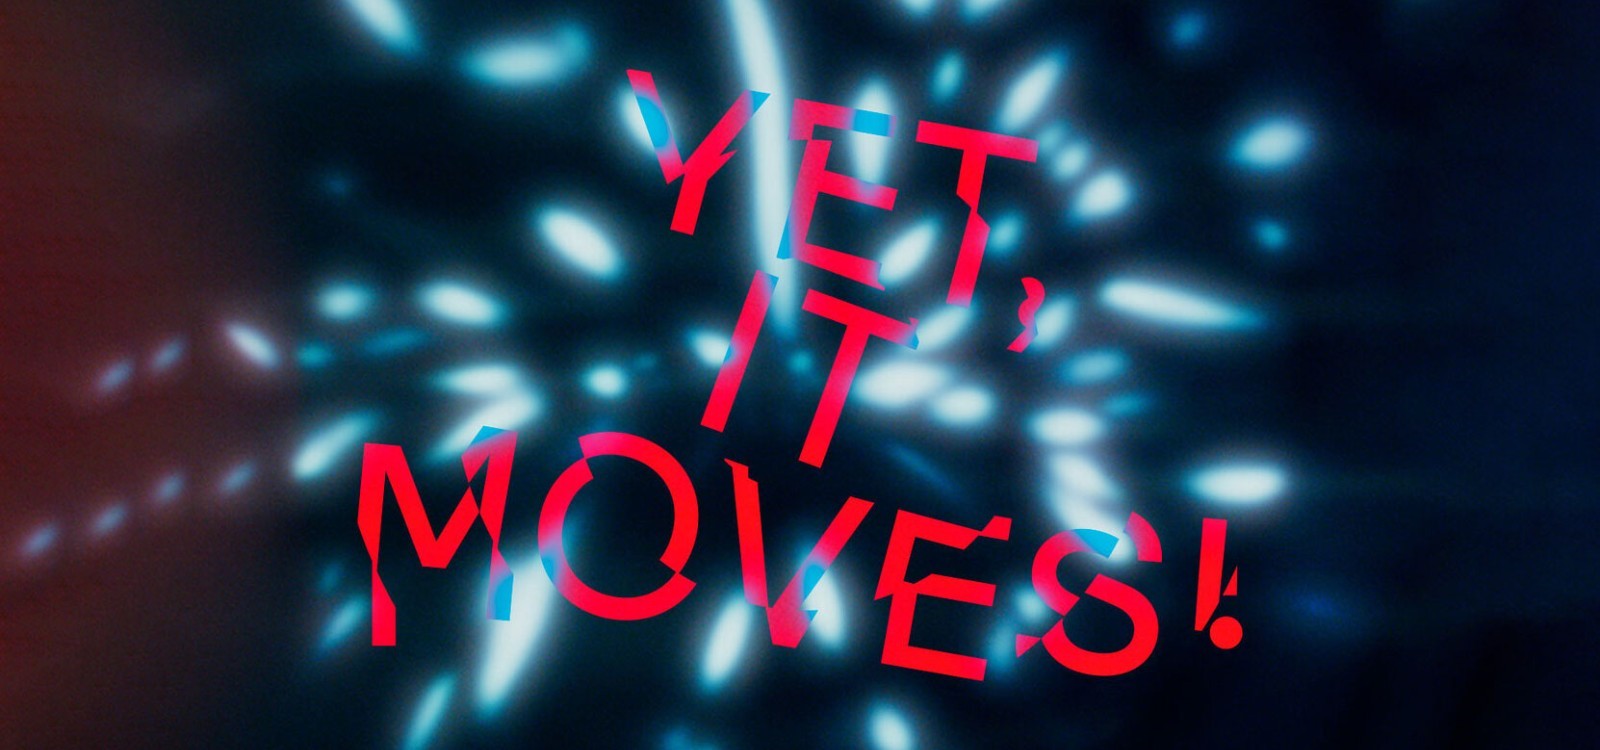 yet-it-moves visual